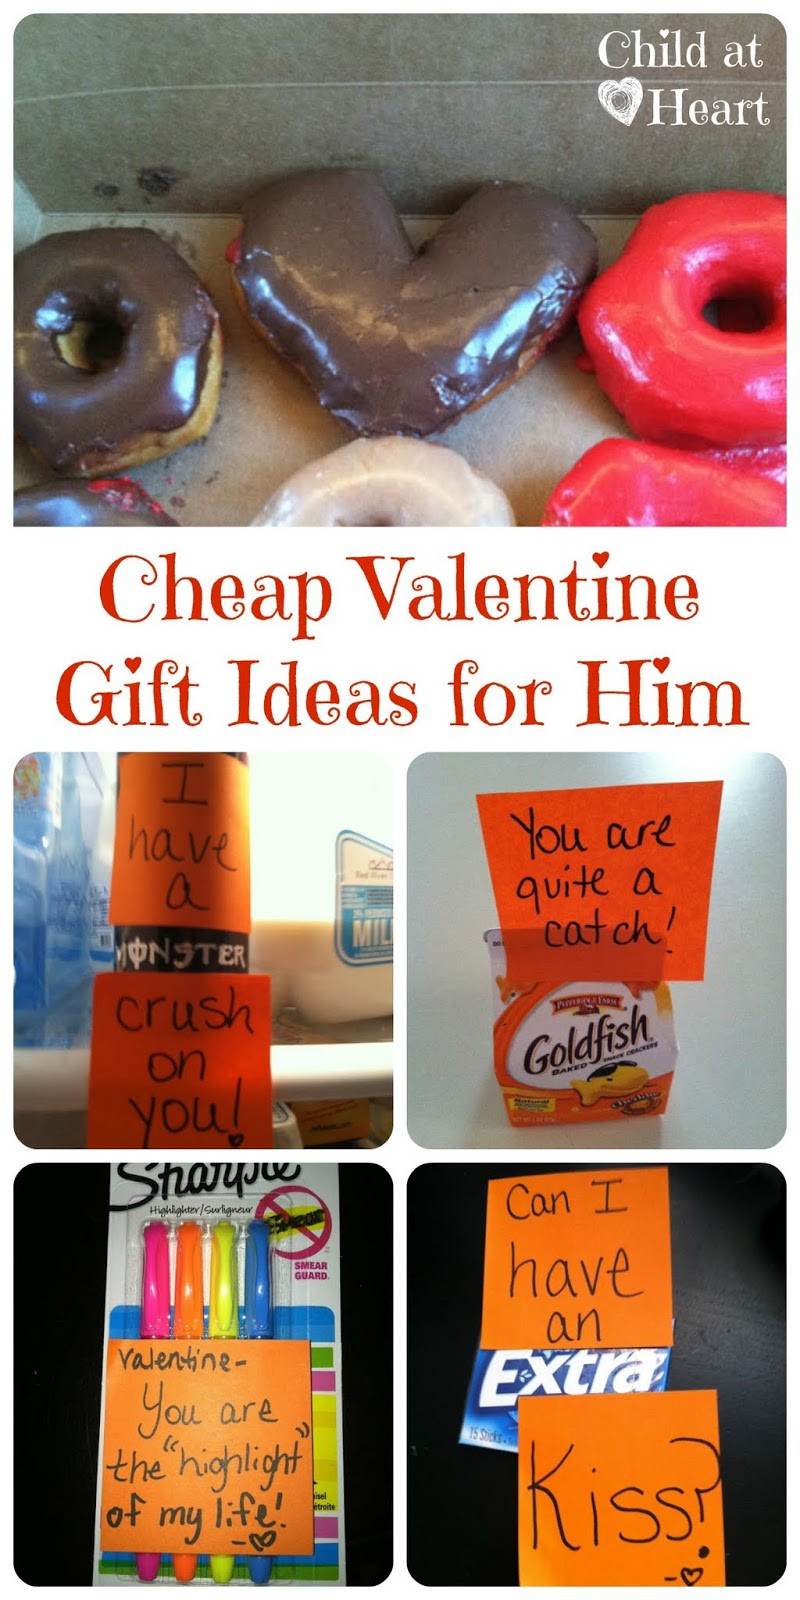 Gift Ideas For Him For Valentines
 Cheap Valentine Gift Ideas for Him Child at Heart Blog